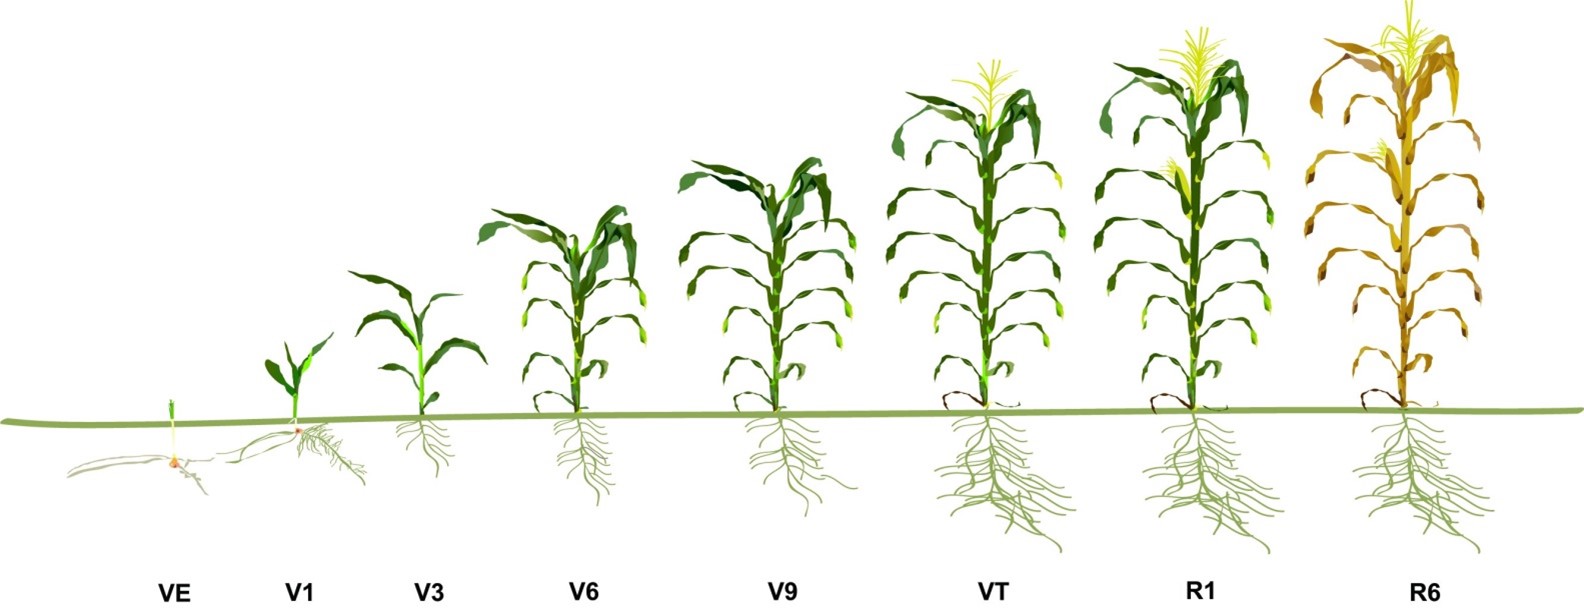 staging corn growth diagram